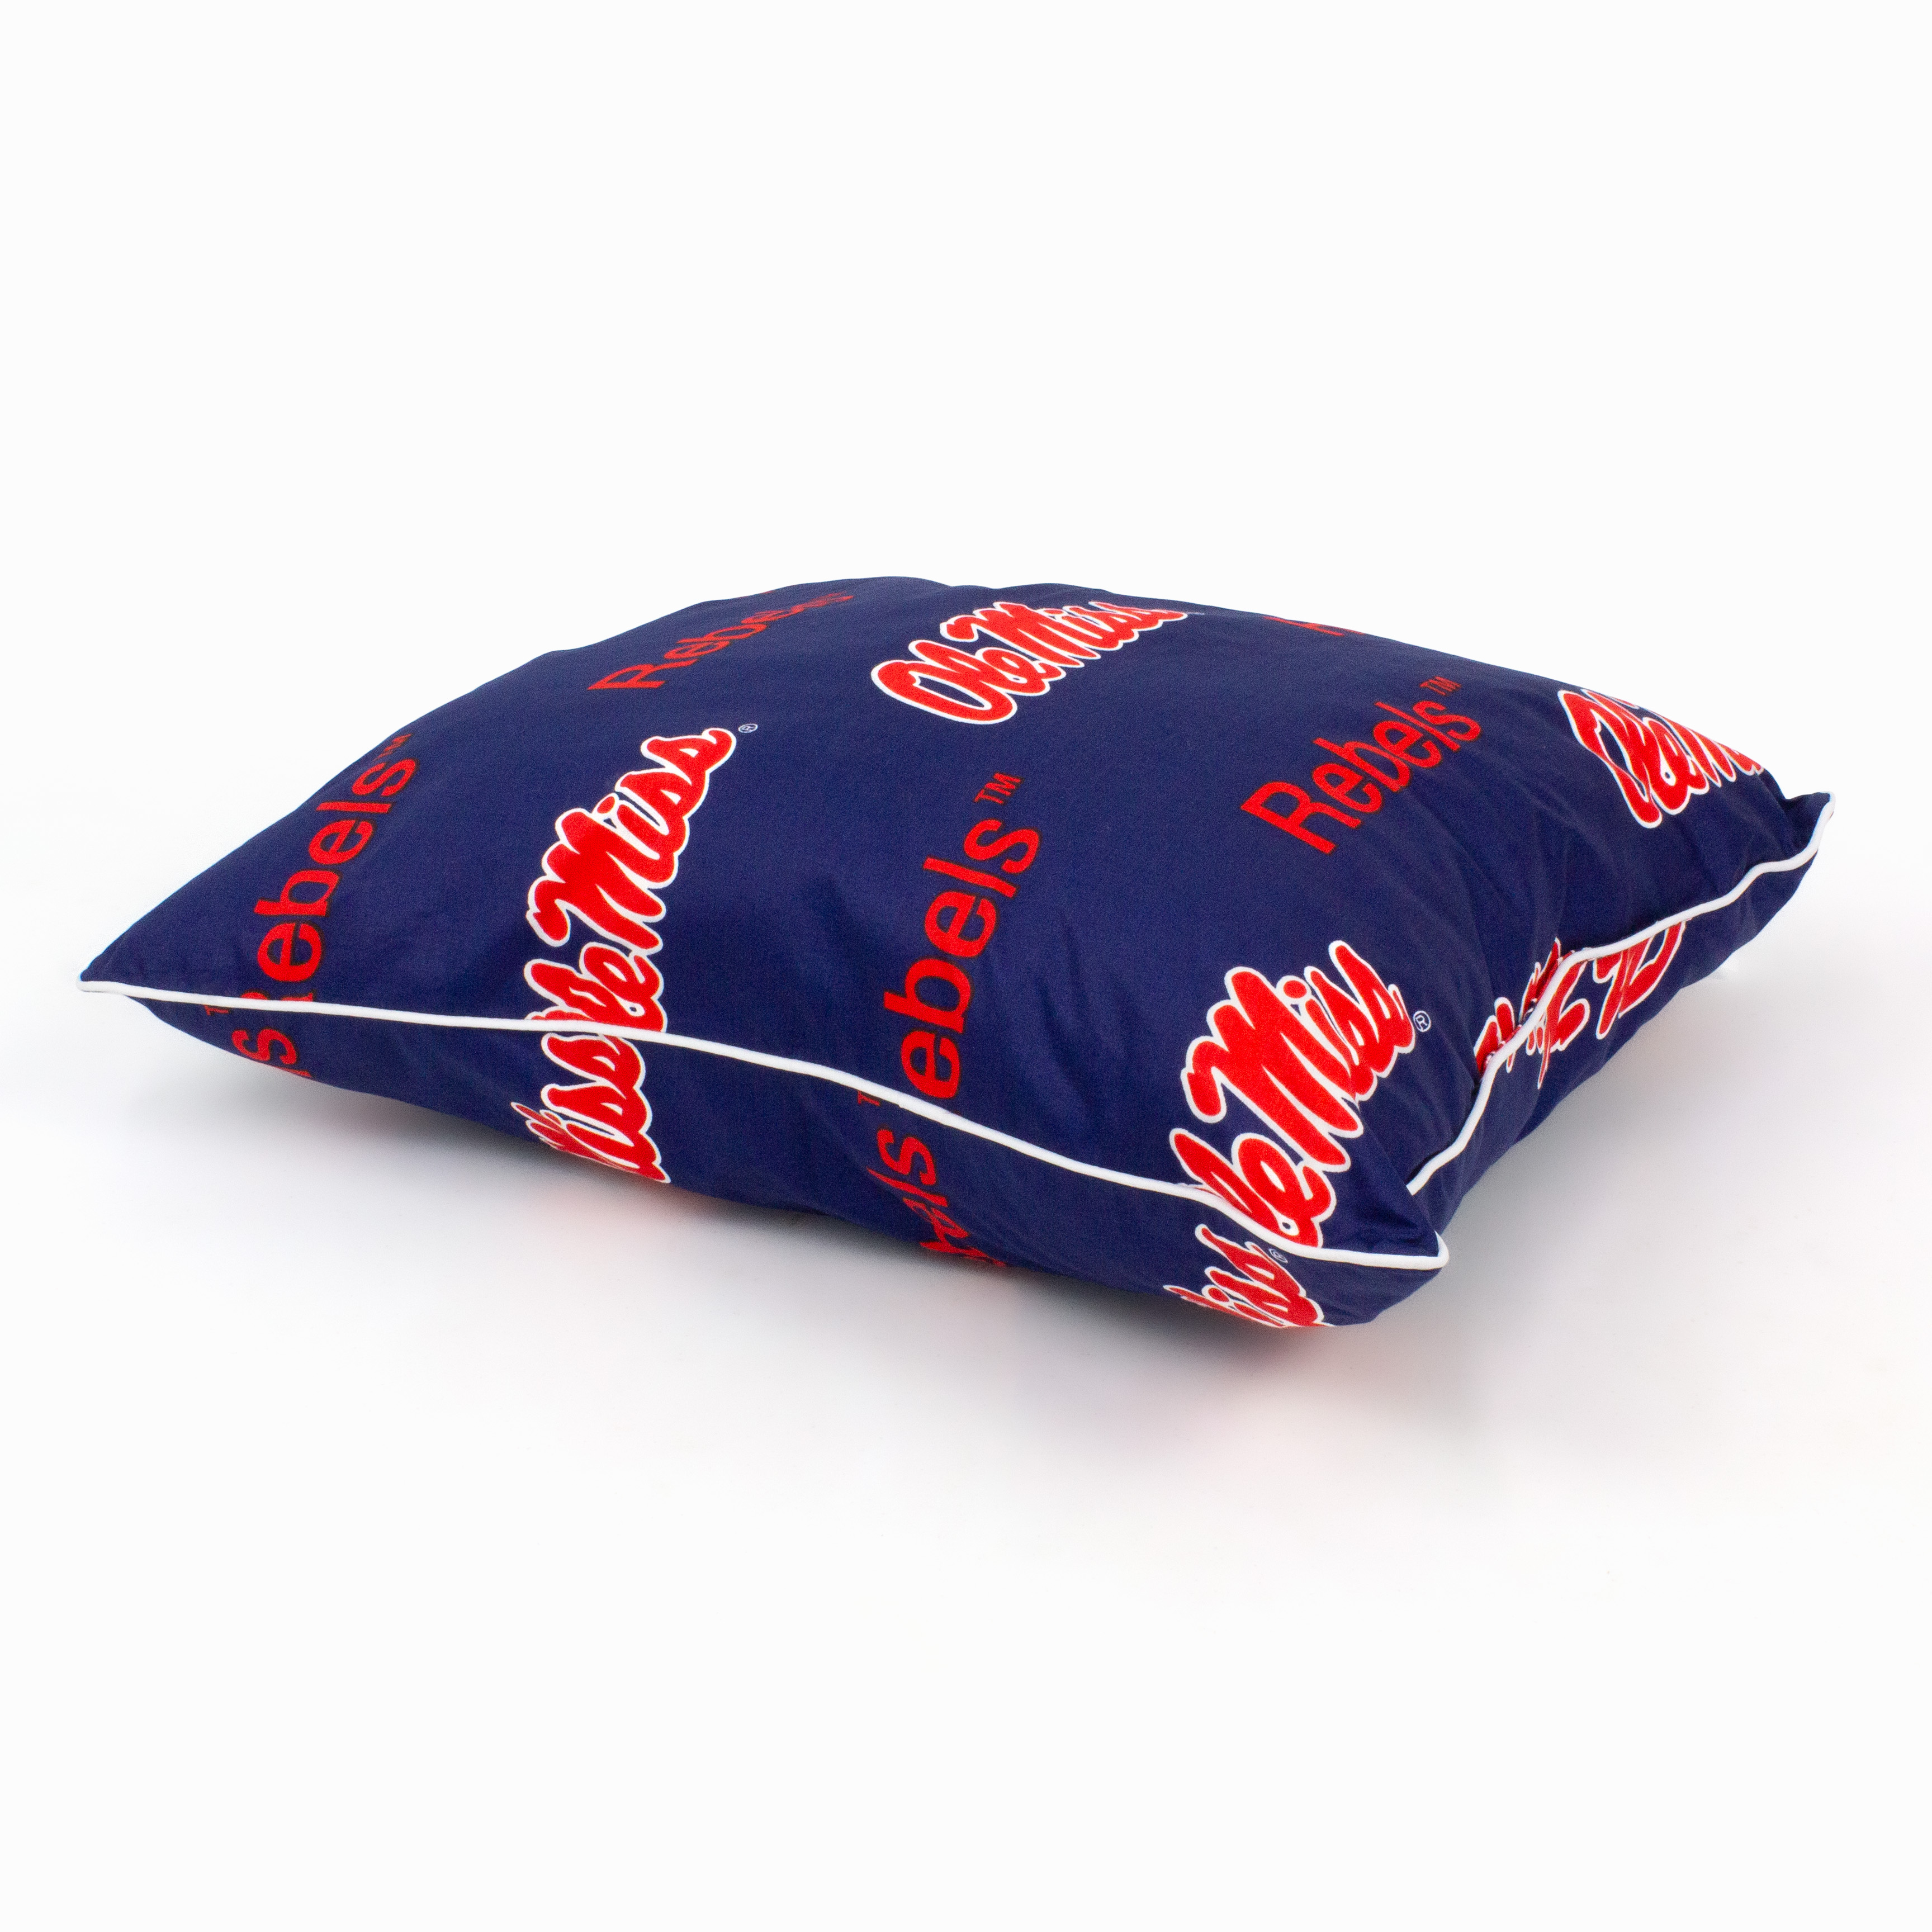 Mississippi Rebels 16" x 16" Decorative Pillow - (Includes 2 Decorative Pillows) - image 4 of 8